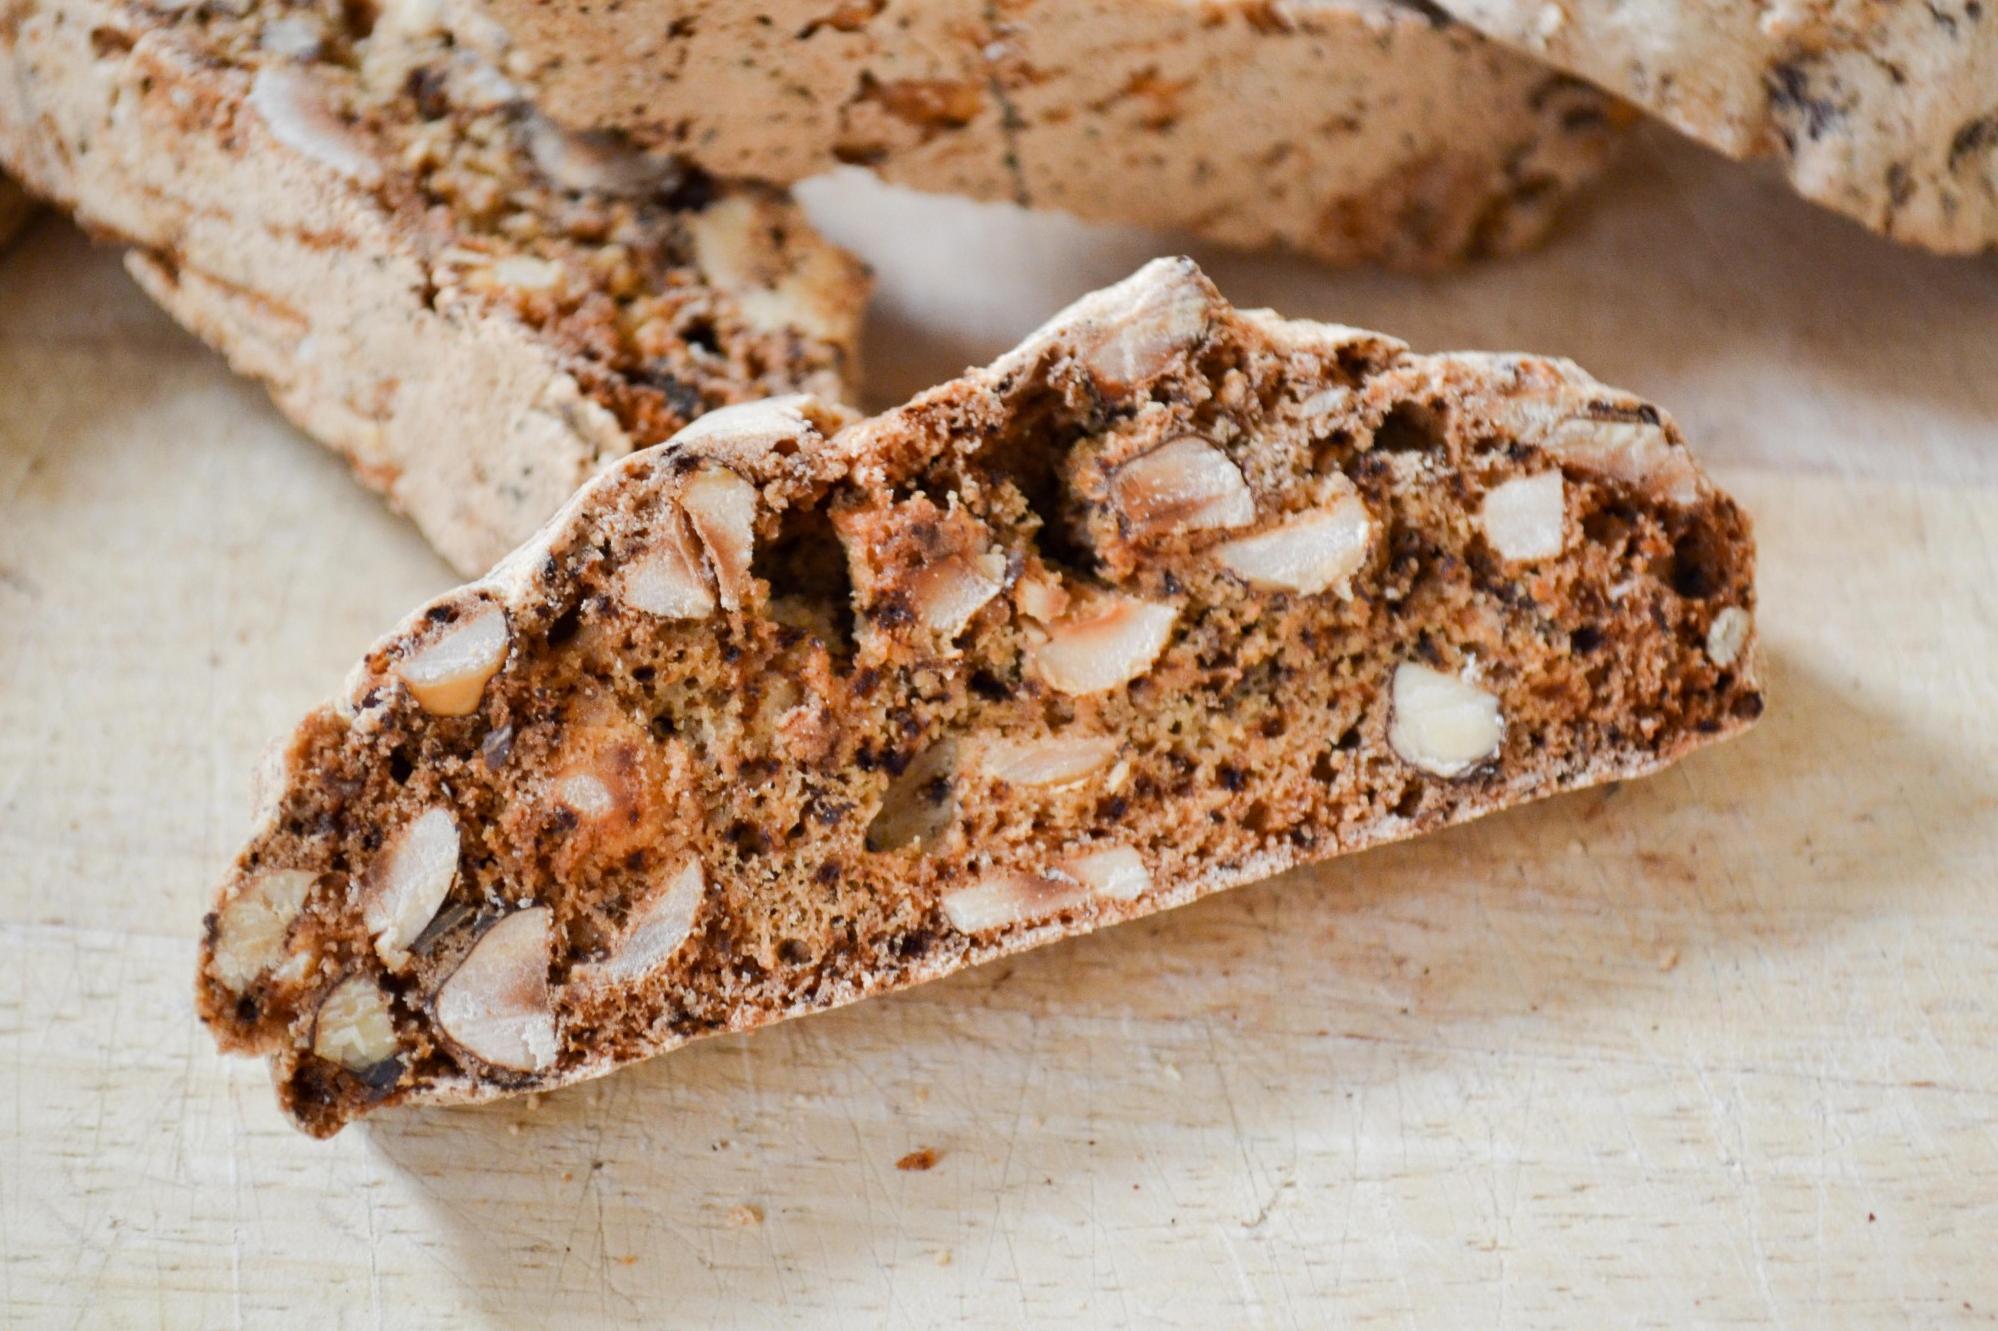  With a hint of cinnamon and a drizzle of chocolate, our biscotti